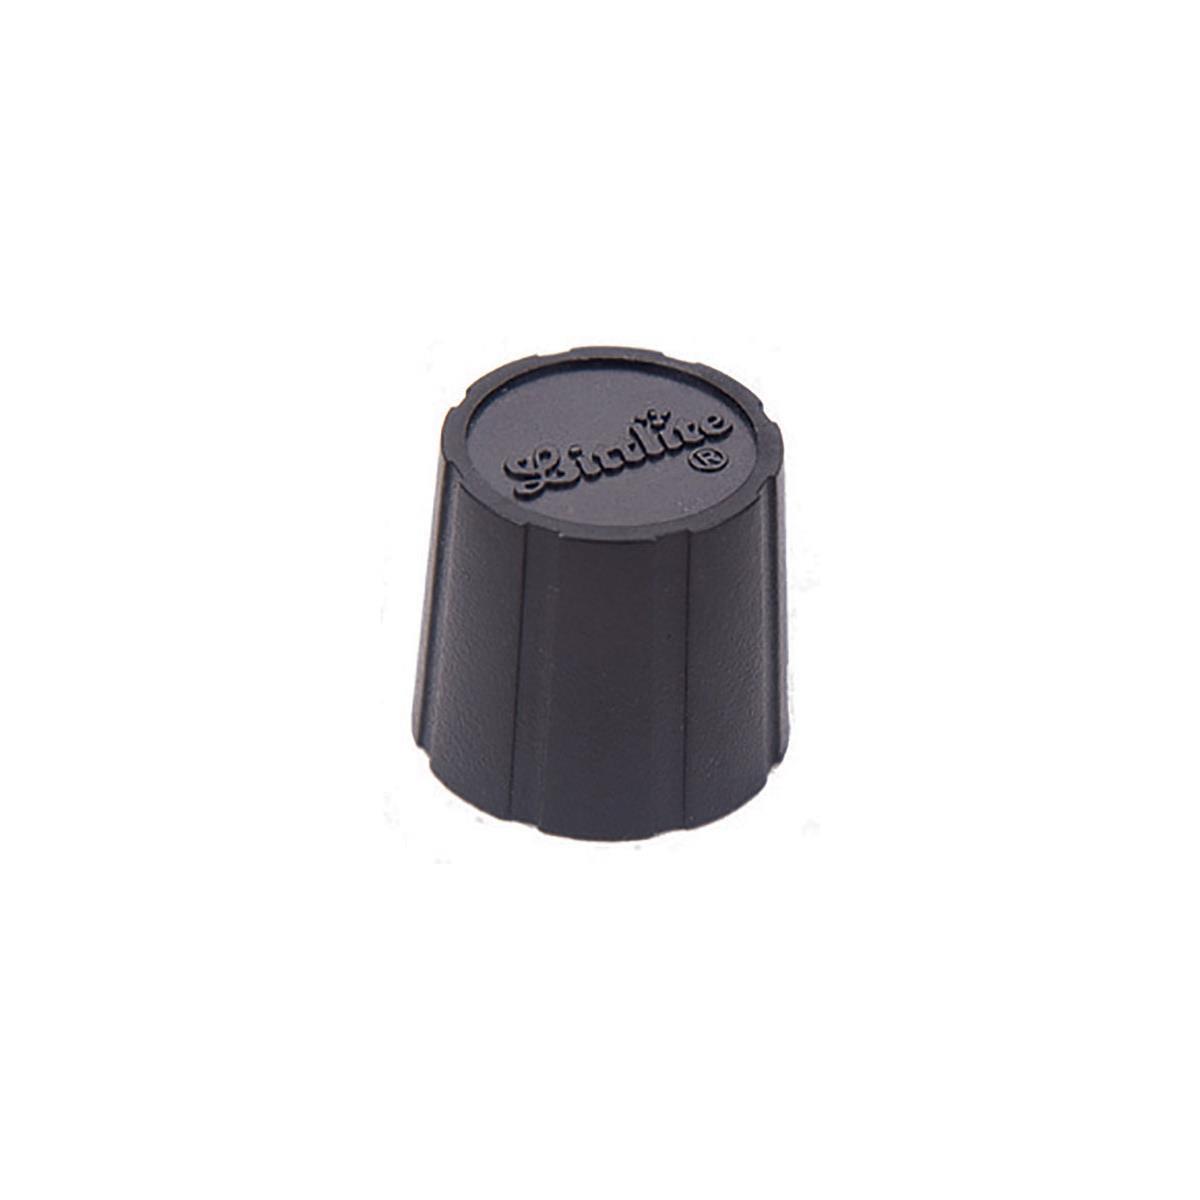 Image of Littlite Replacement Dimmer Knob for L-Series Dimmer Switch